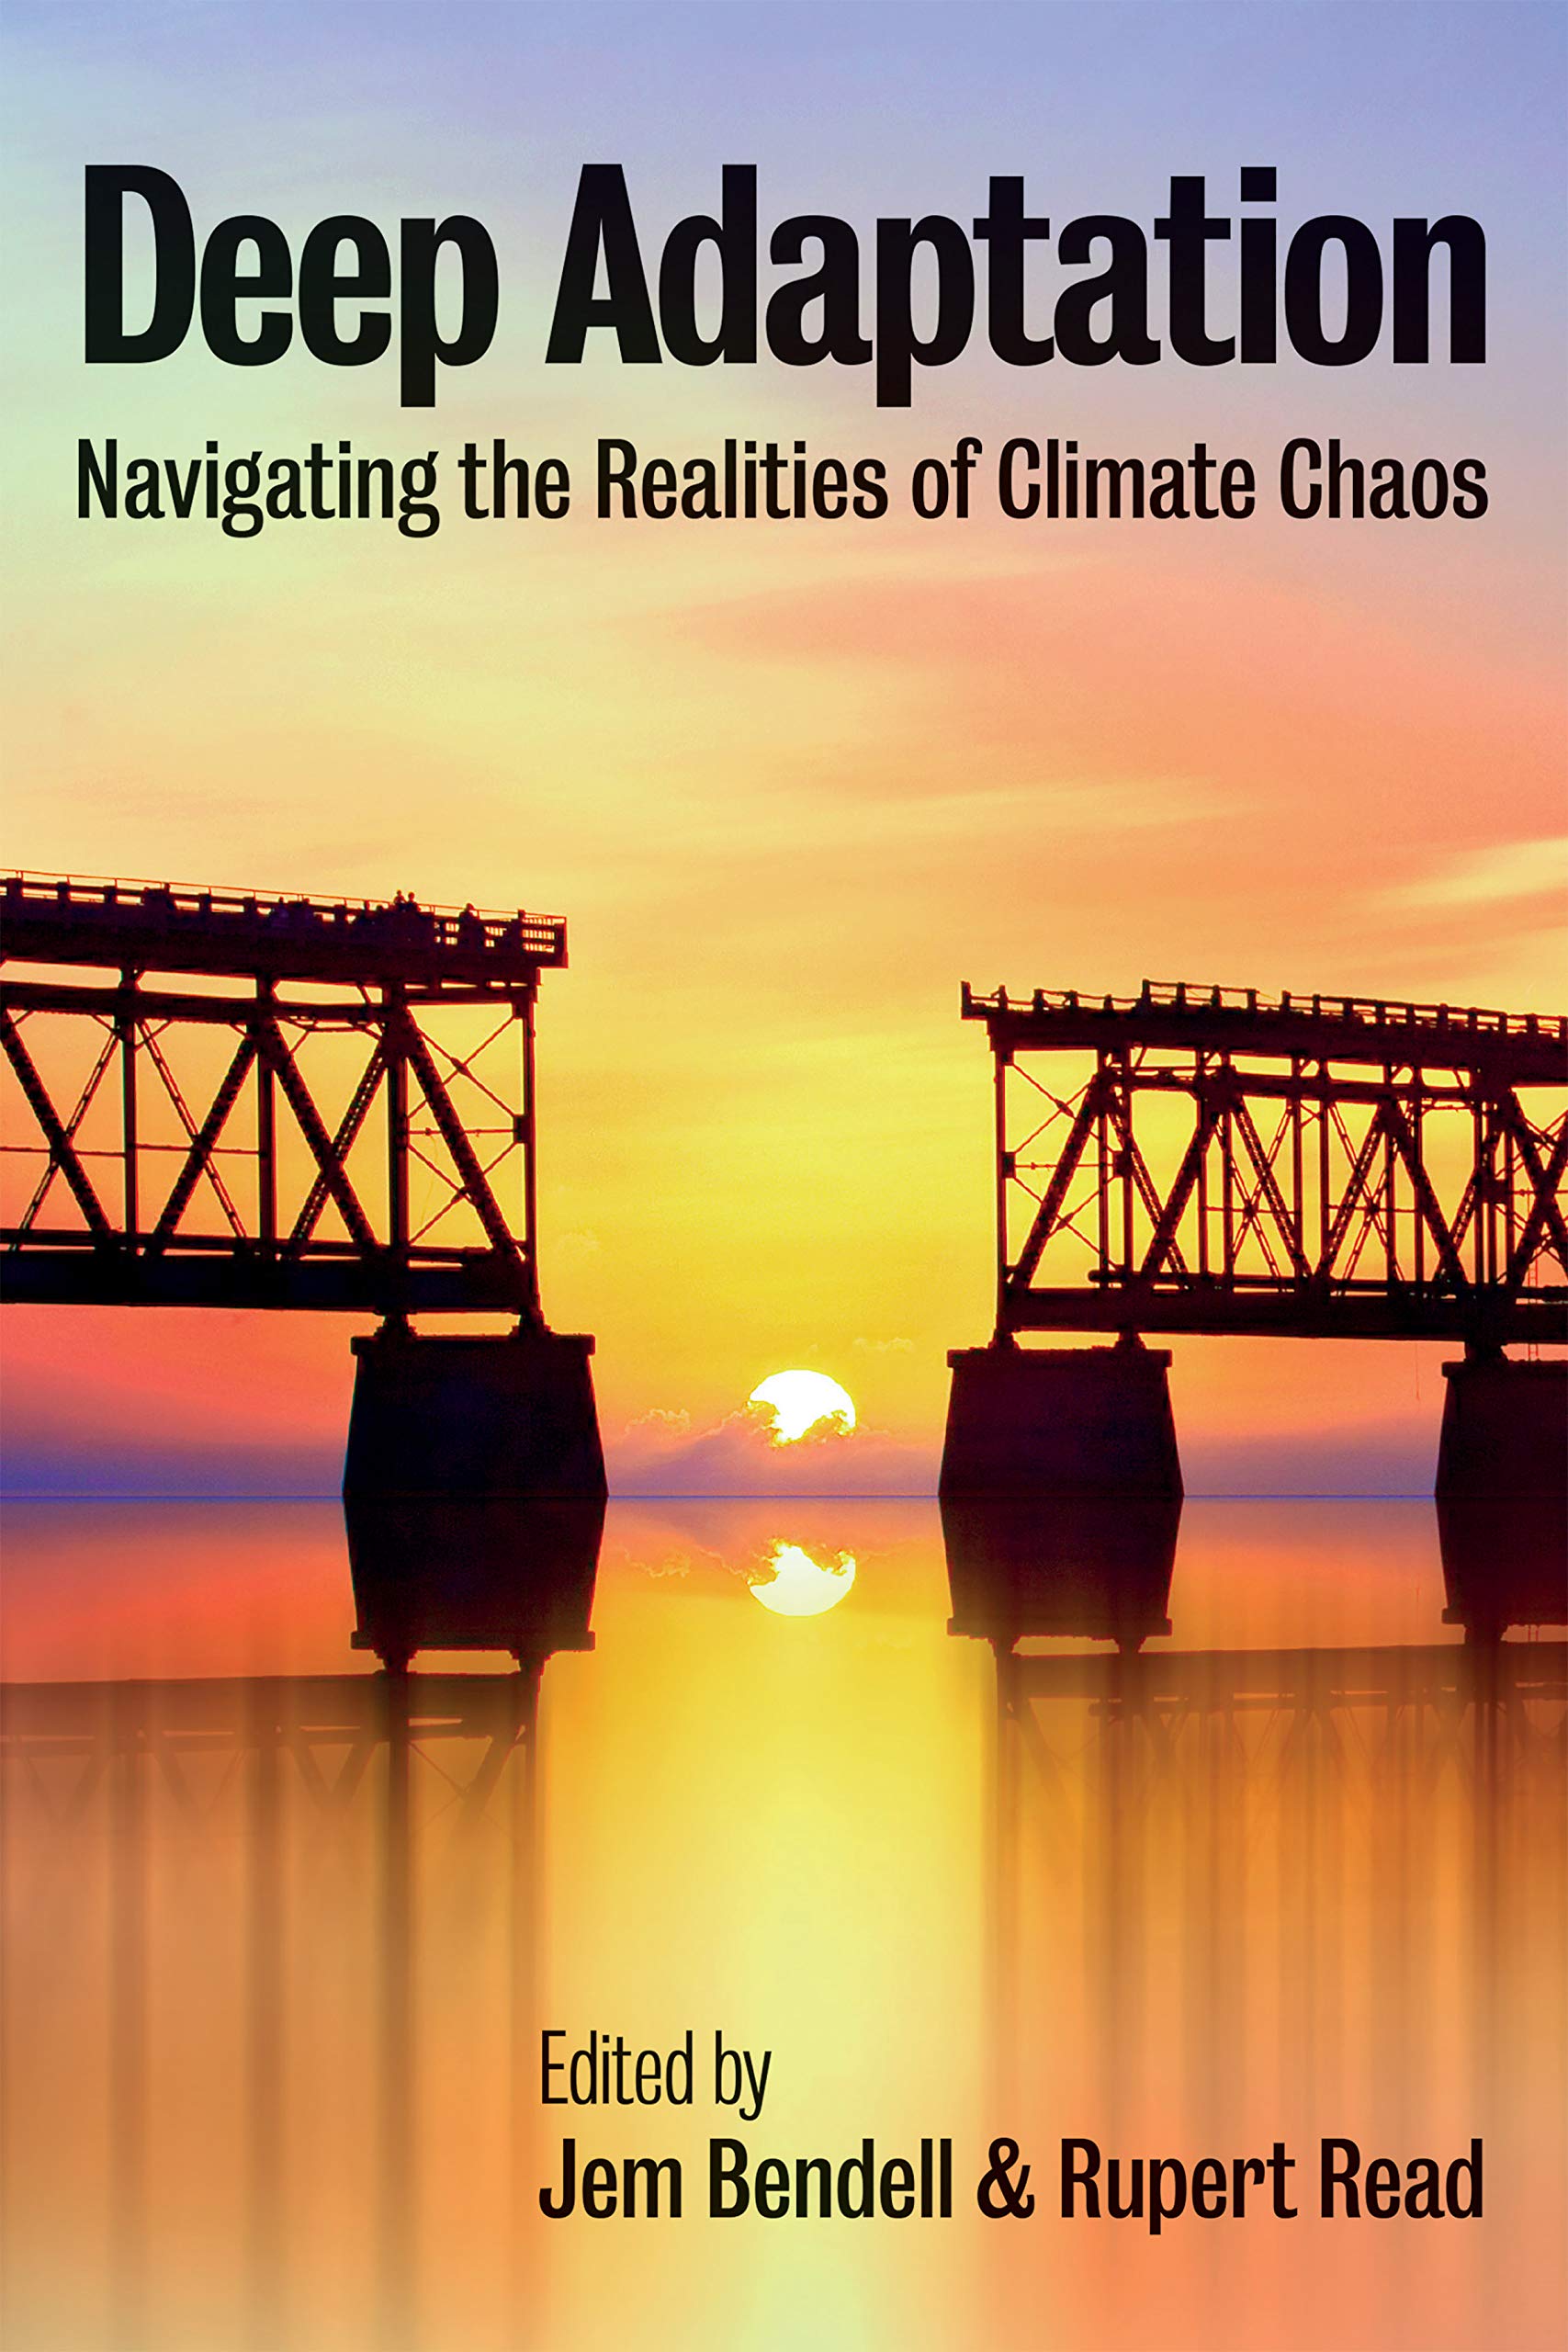 Book cover of Deep Adaptation. It contains a picture of a sunset in between a bridge missing the middle part.